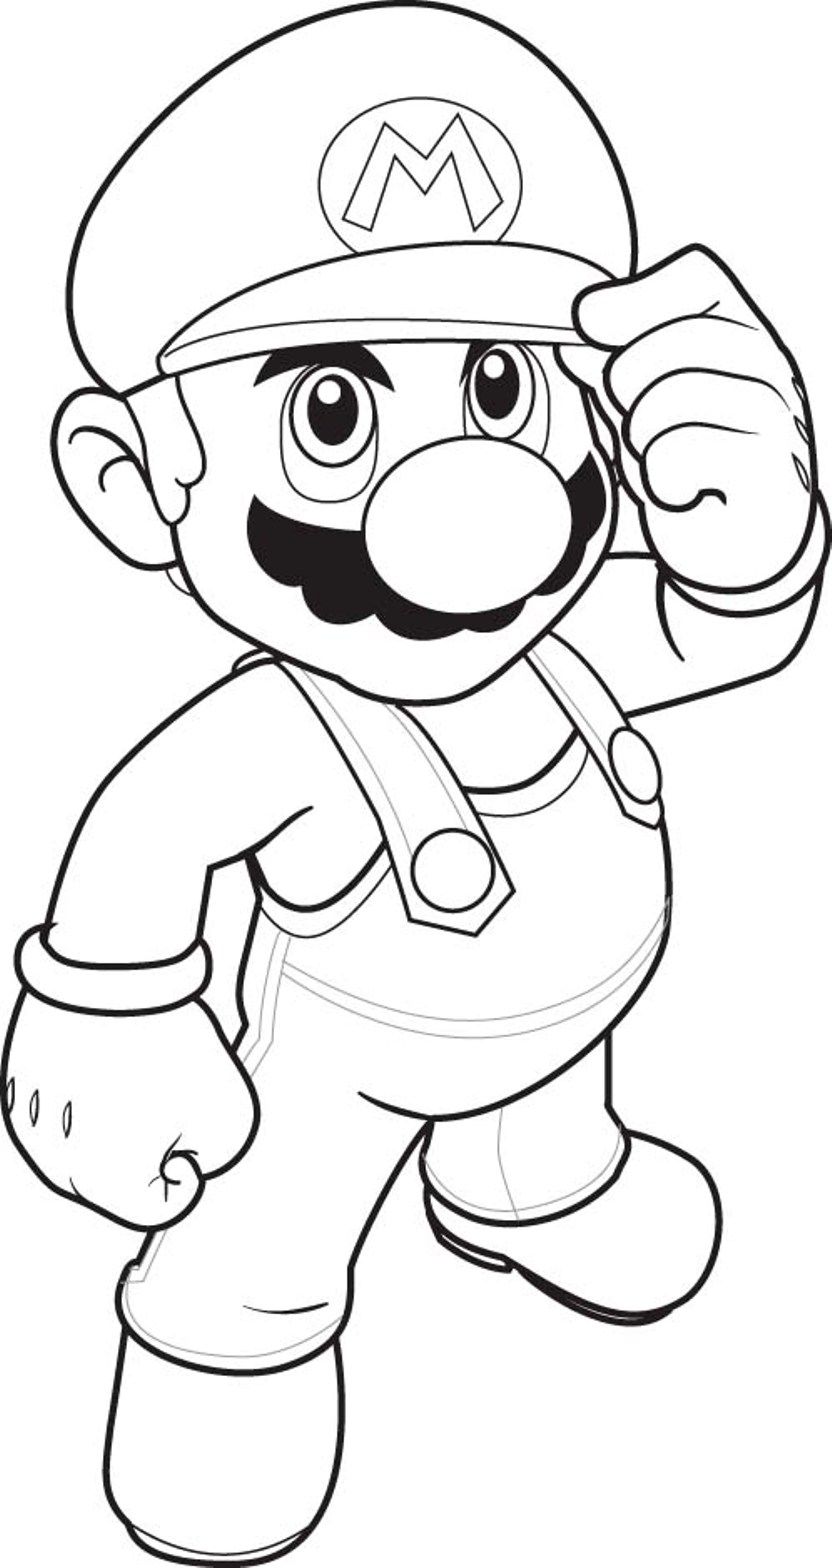 Baby Mario And Luigi Coloring Pages | Cartoon Coloring pages of ...